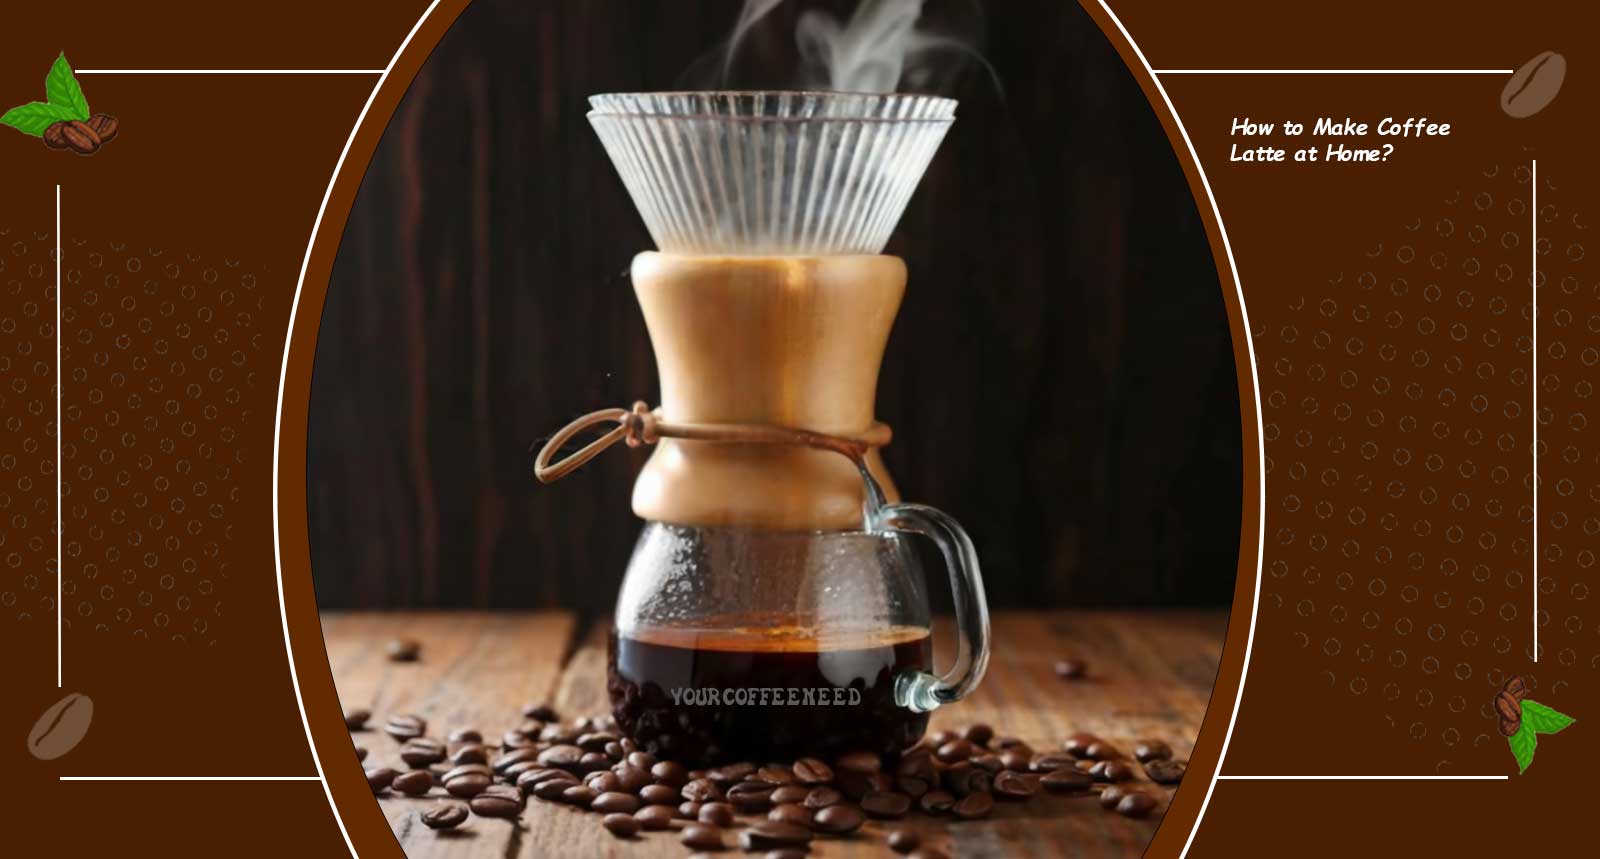 How to Make Coffee Without a Machine?